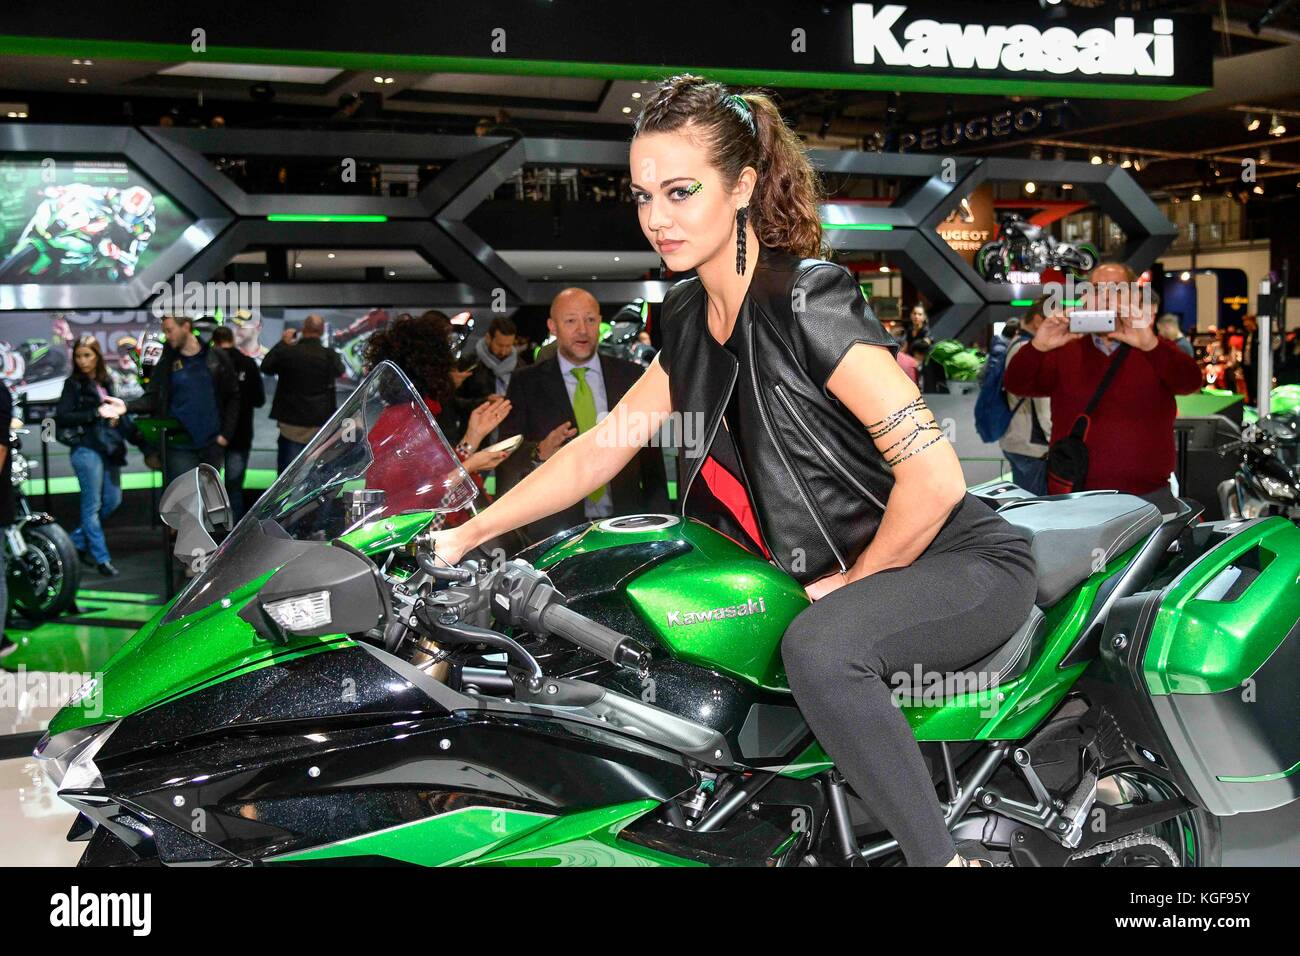 Milan, Italy. 07th Nov, 2017. Milan. EICMA Motorcycle and Cycle Fair  Opening Day In photo: Credit: Independent Photo Agency/Alamy Live News  Stock Photo - Alamy